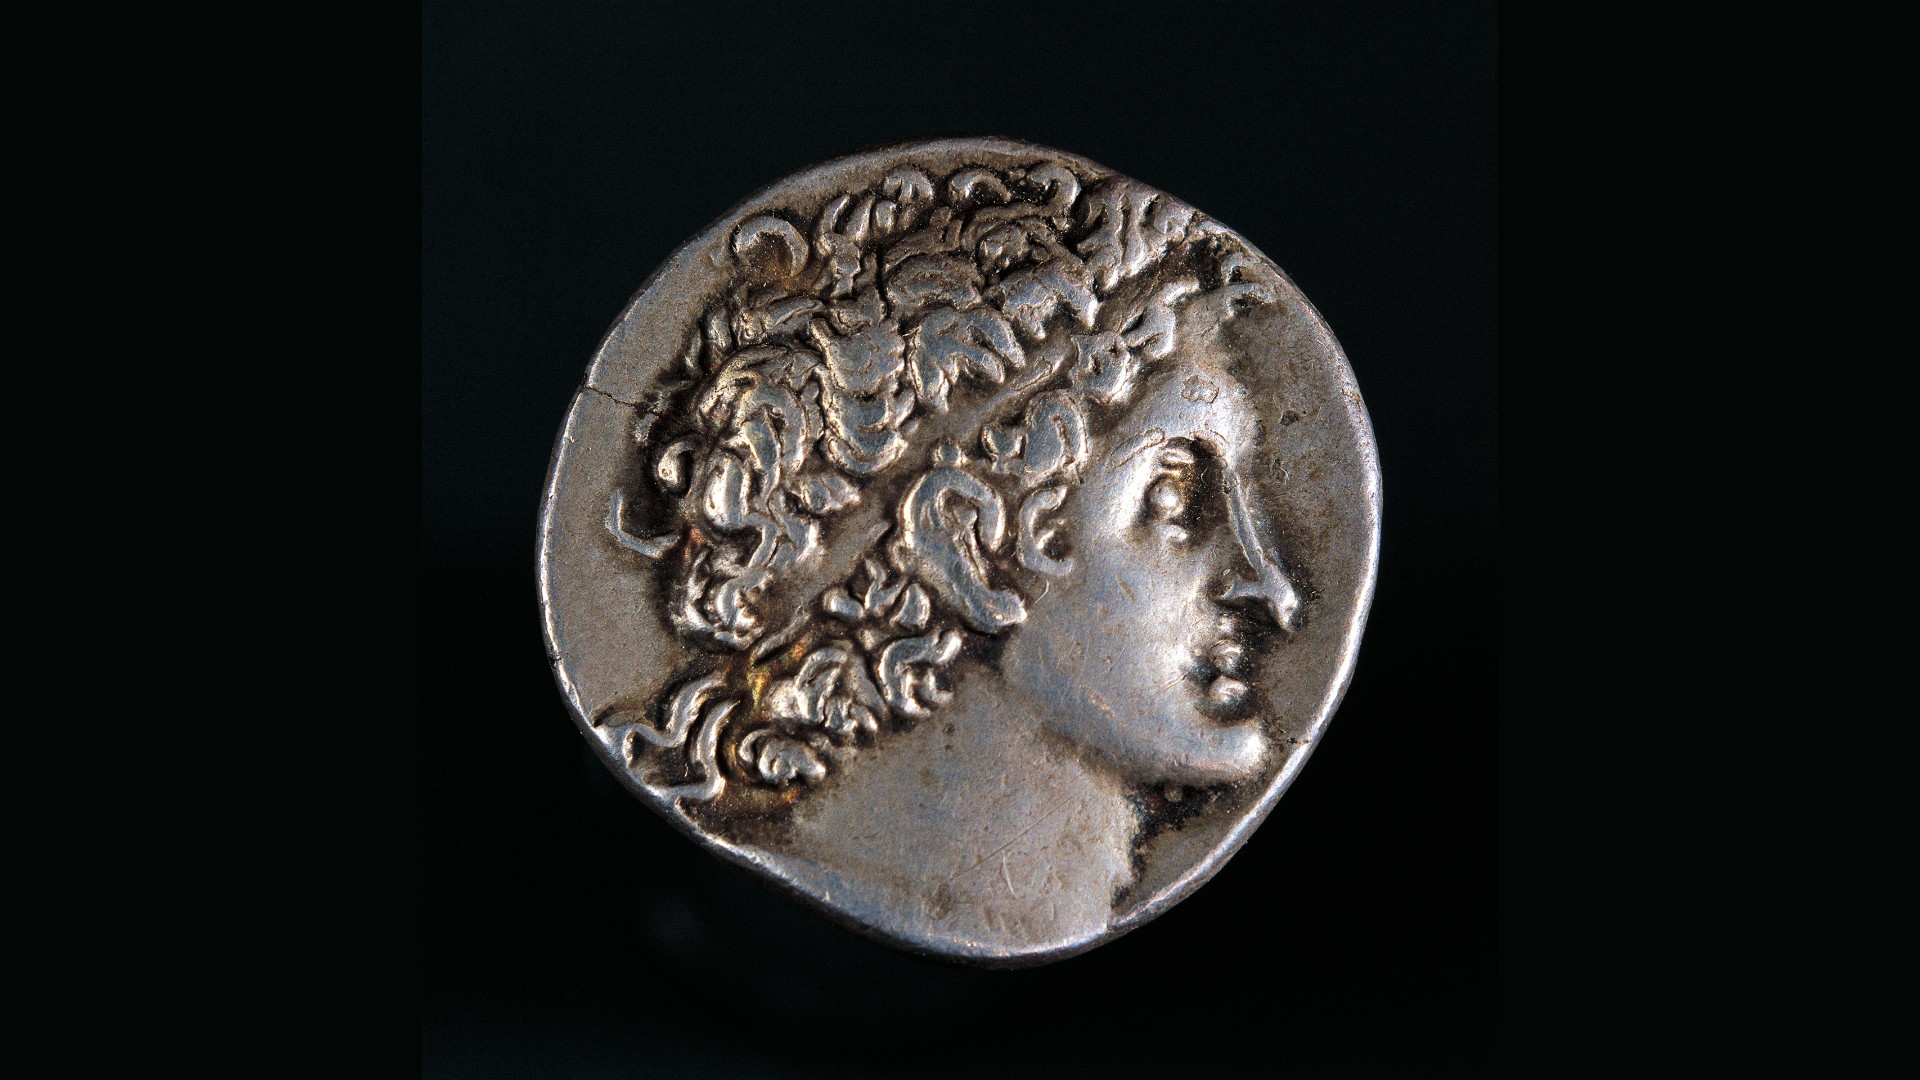 Silver tetradrachm bearing the image of Ptolemy I Soter, recto. Egyptian coins, A.D. 4th-3rd century